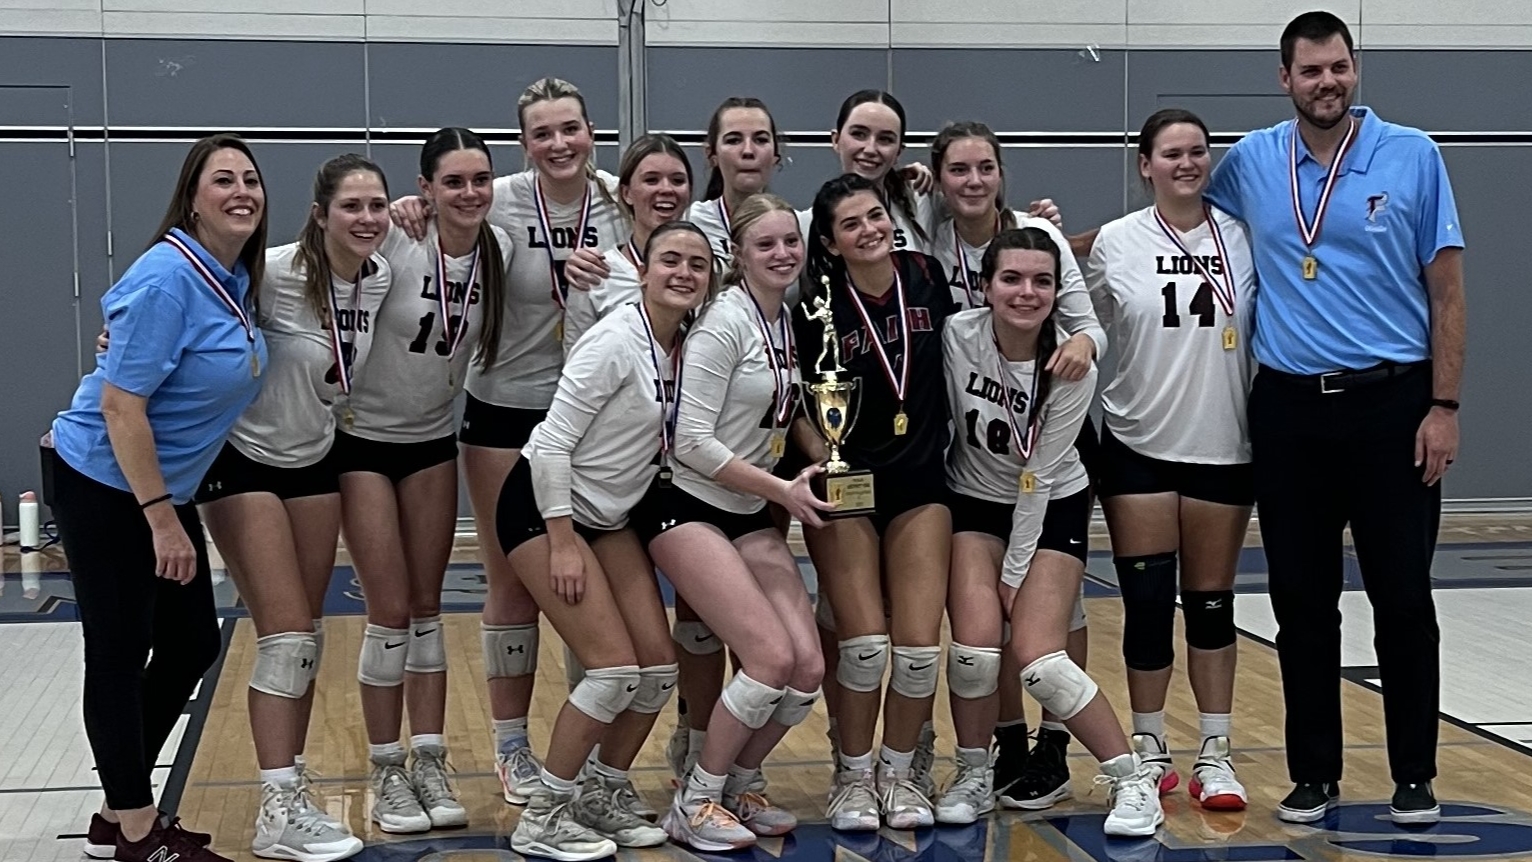 Congrats to our District 1 1A Volleyball Champions! - Content Image for demo40445_bigteams_com